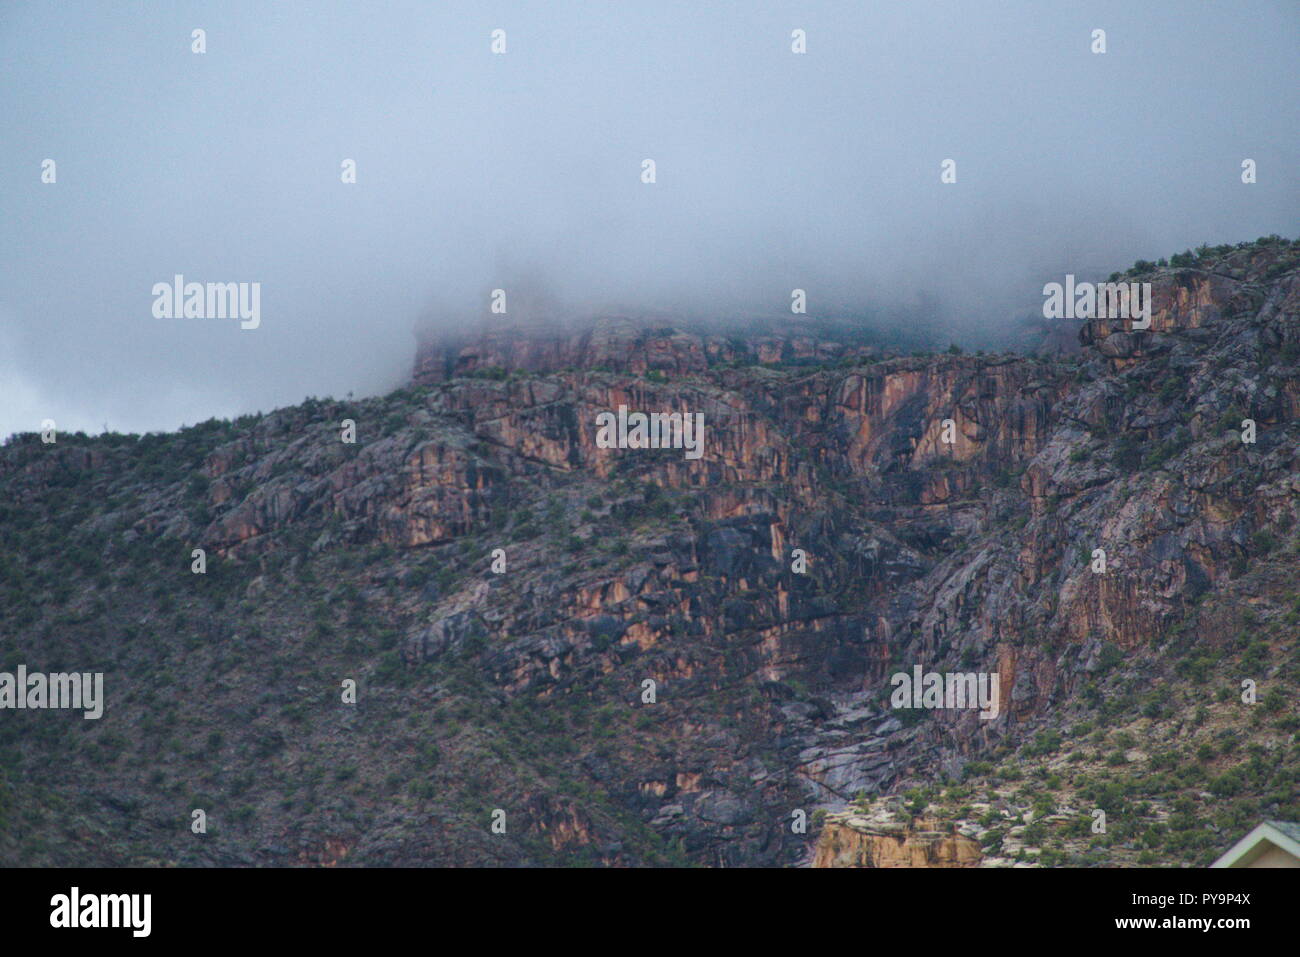 The Colorado National Monument shrouded by a layer of heavy fog. The clouds above are grey and gloomy. There is an overall downcast vibe. Stock Photo